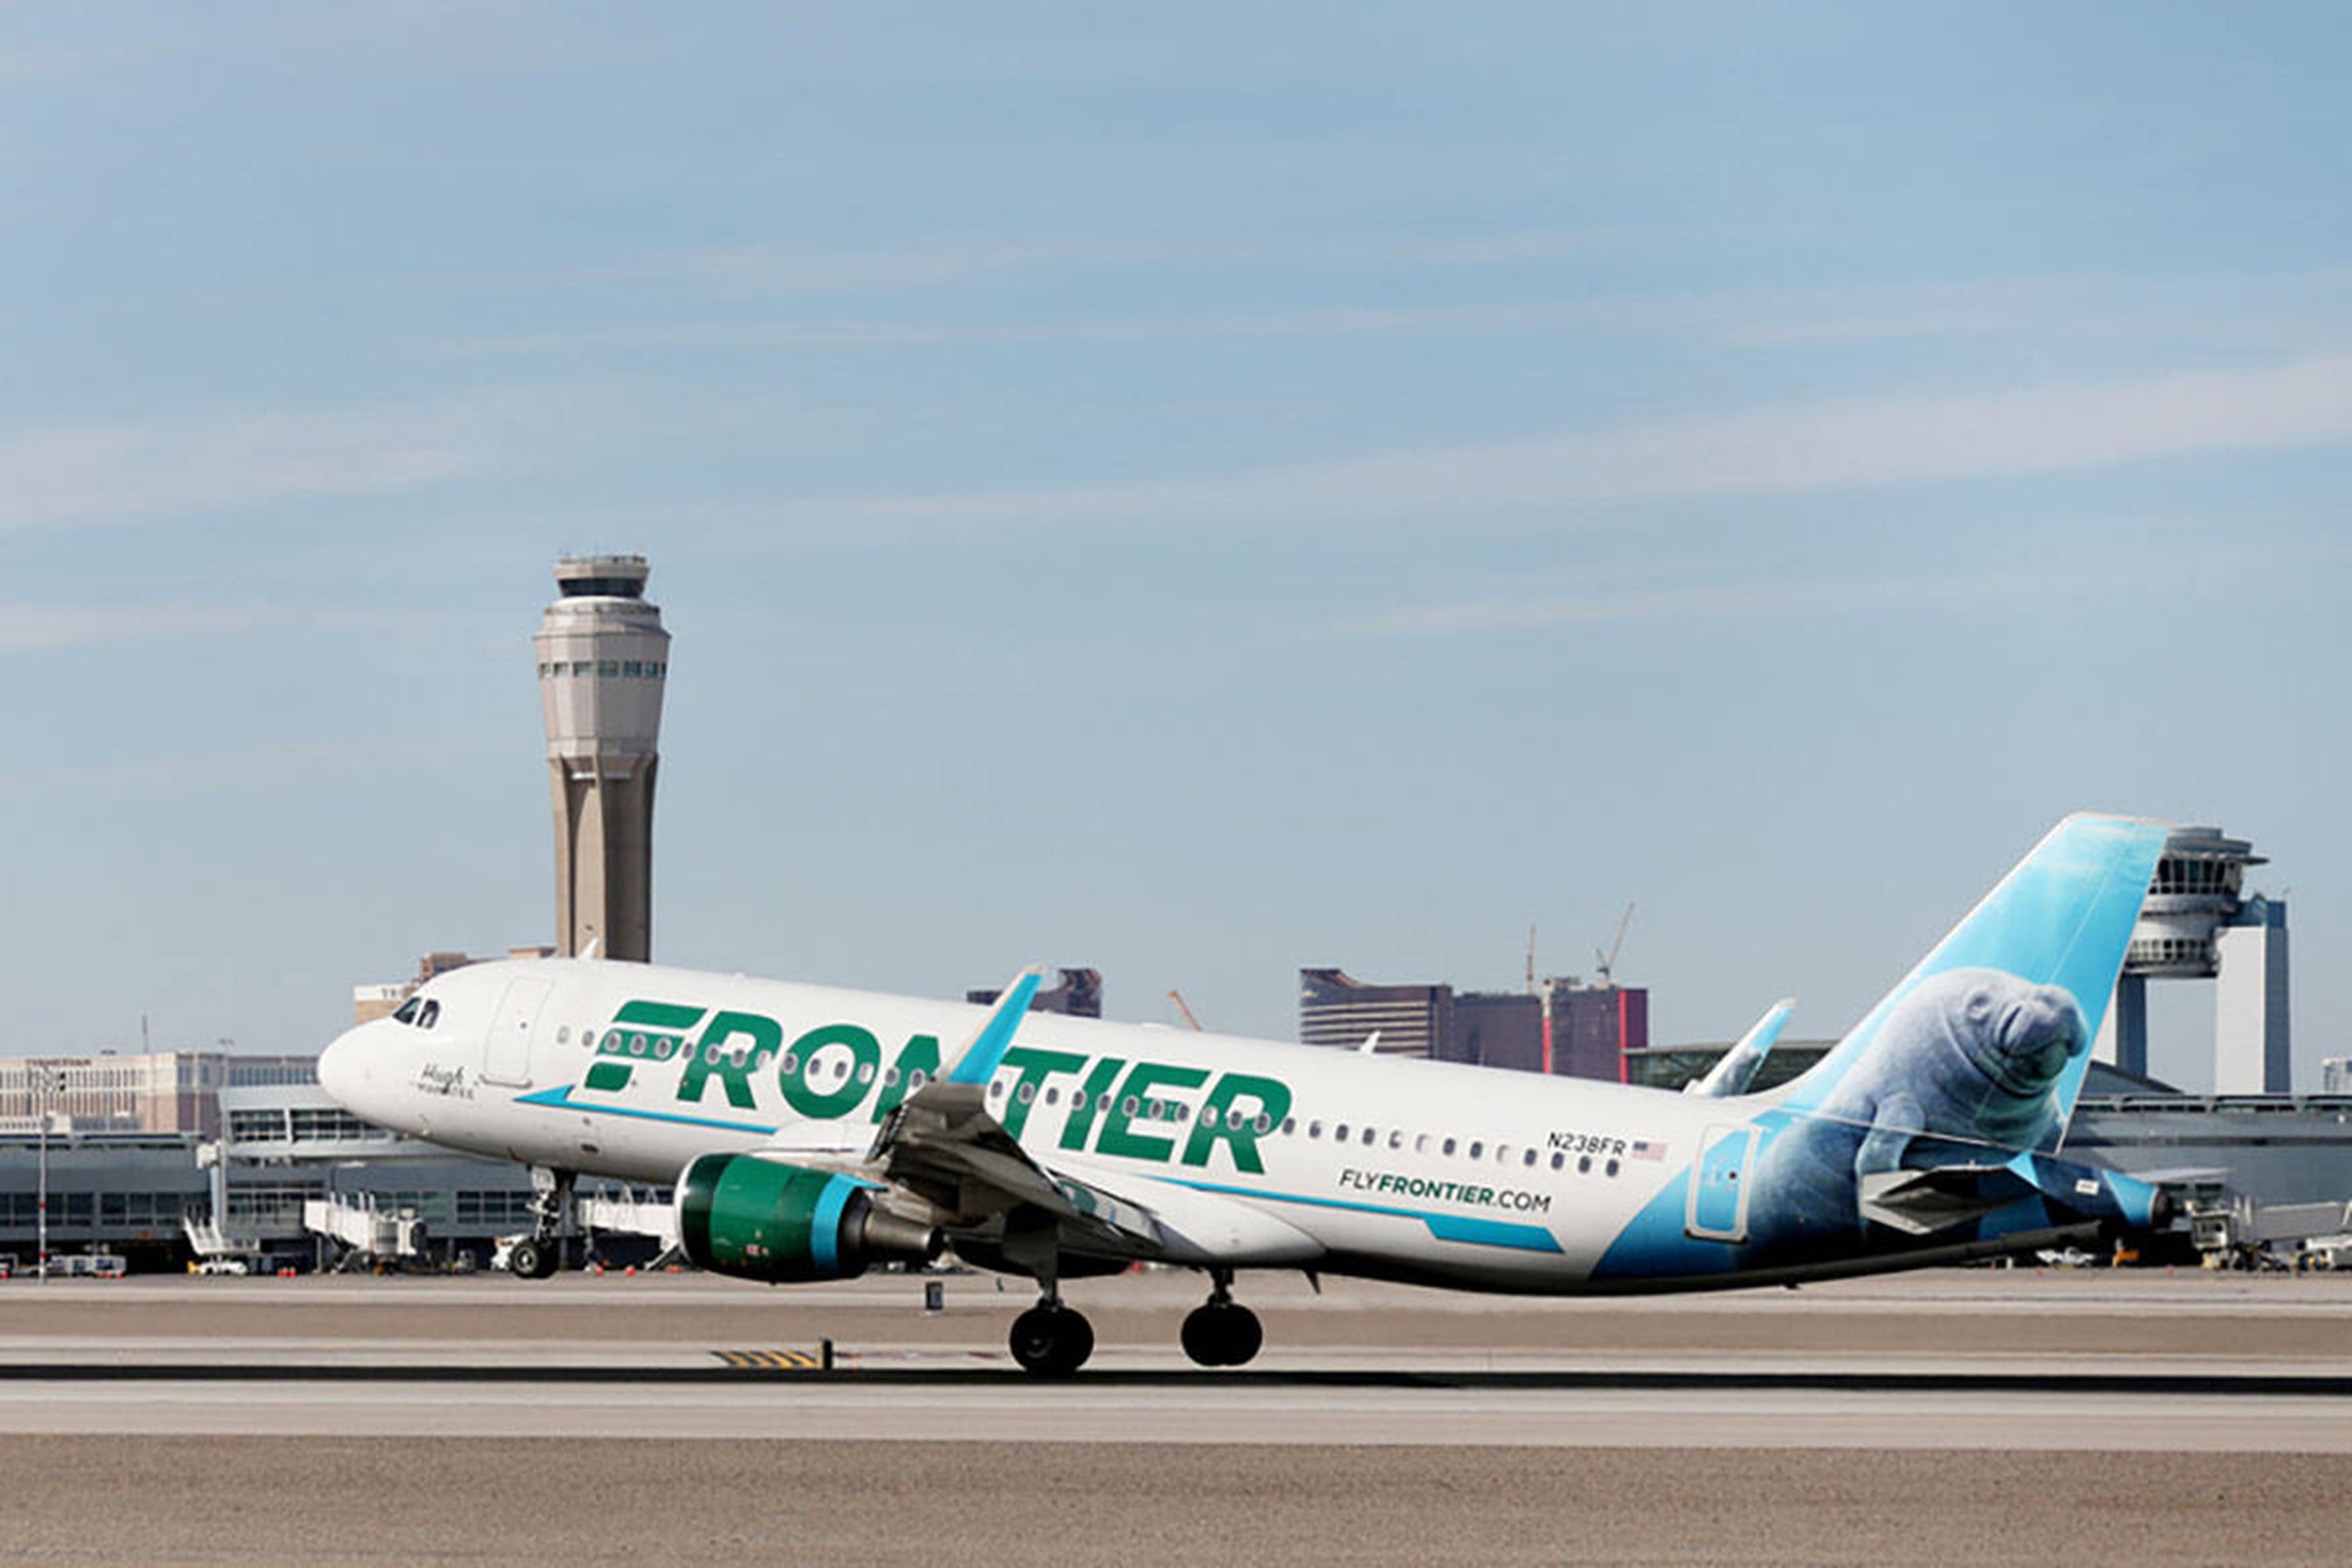 A Frontier plane.